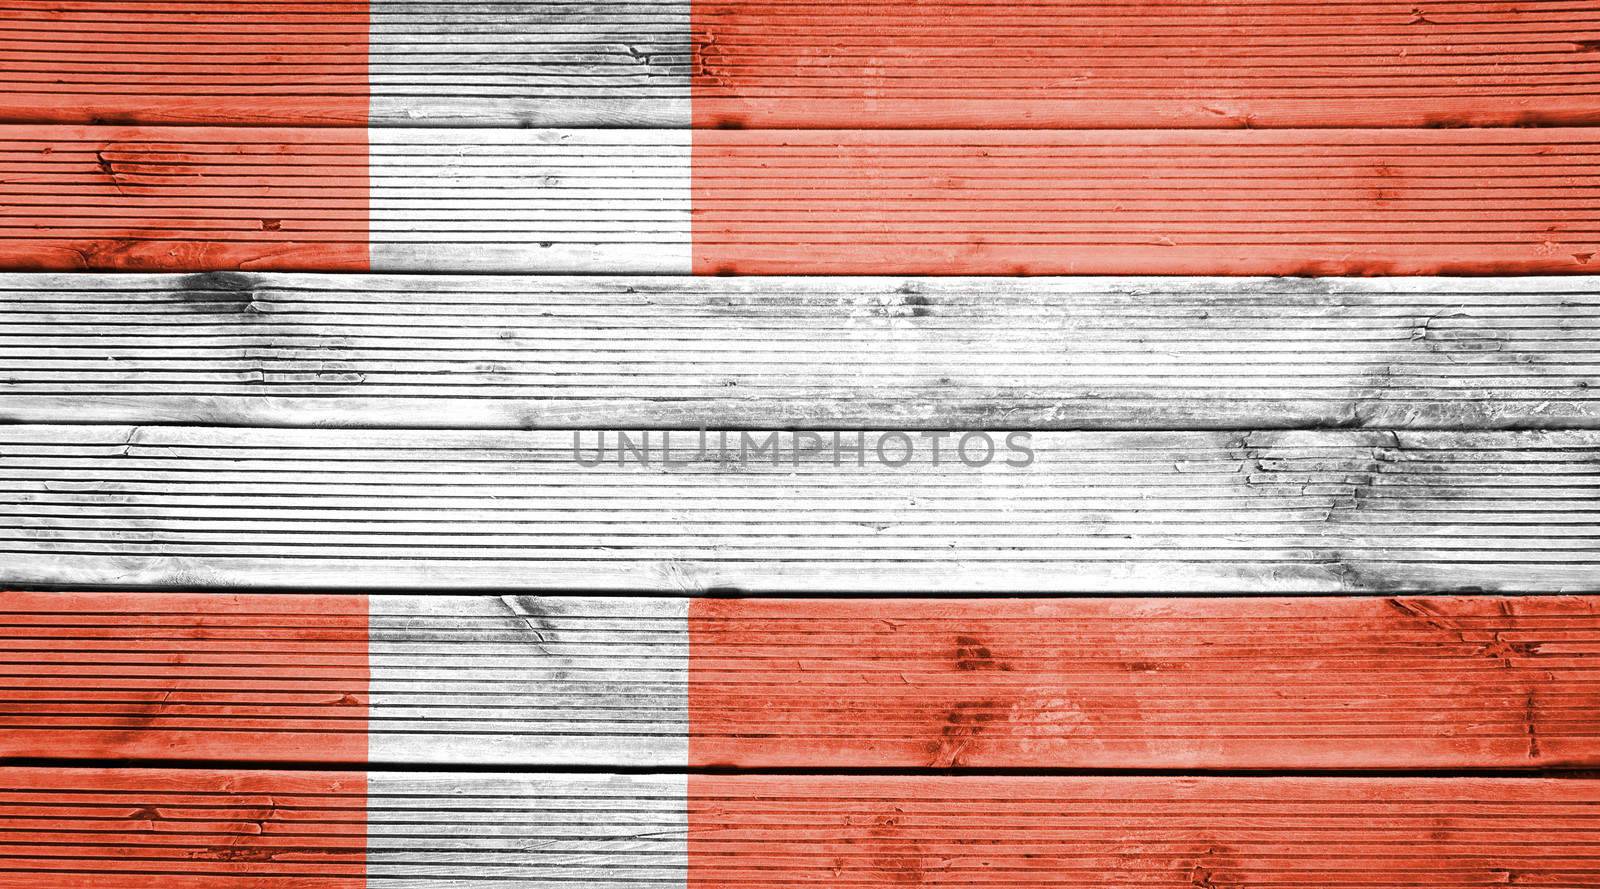 Natural wood planks texture background with the colors of the flag of Denmark